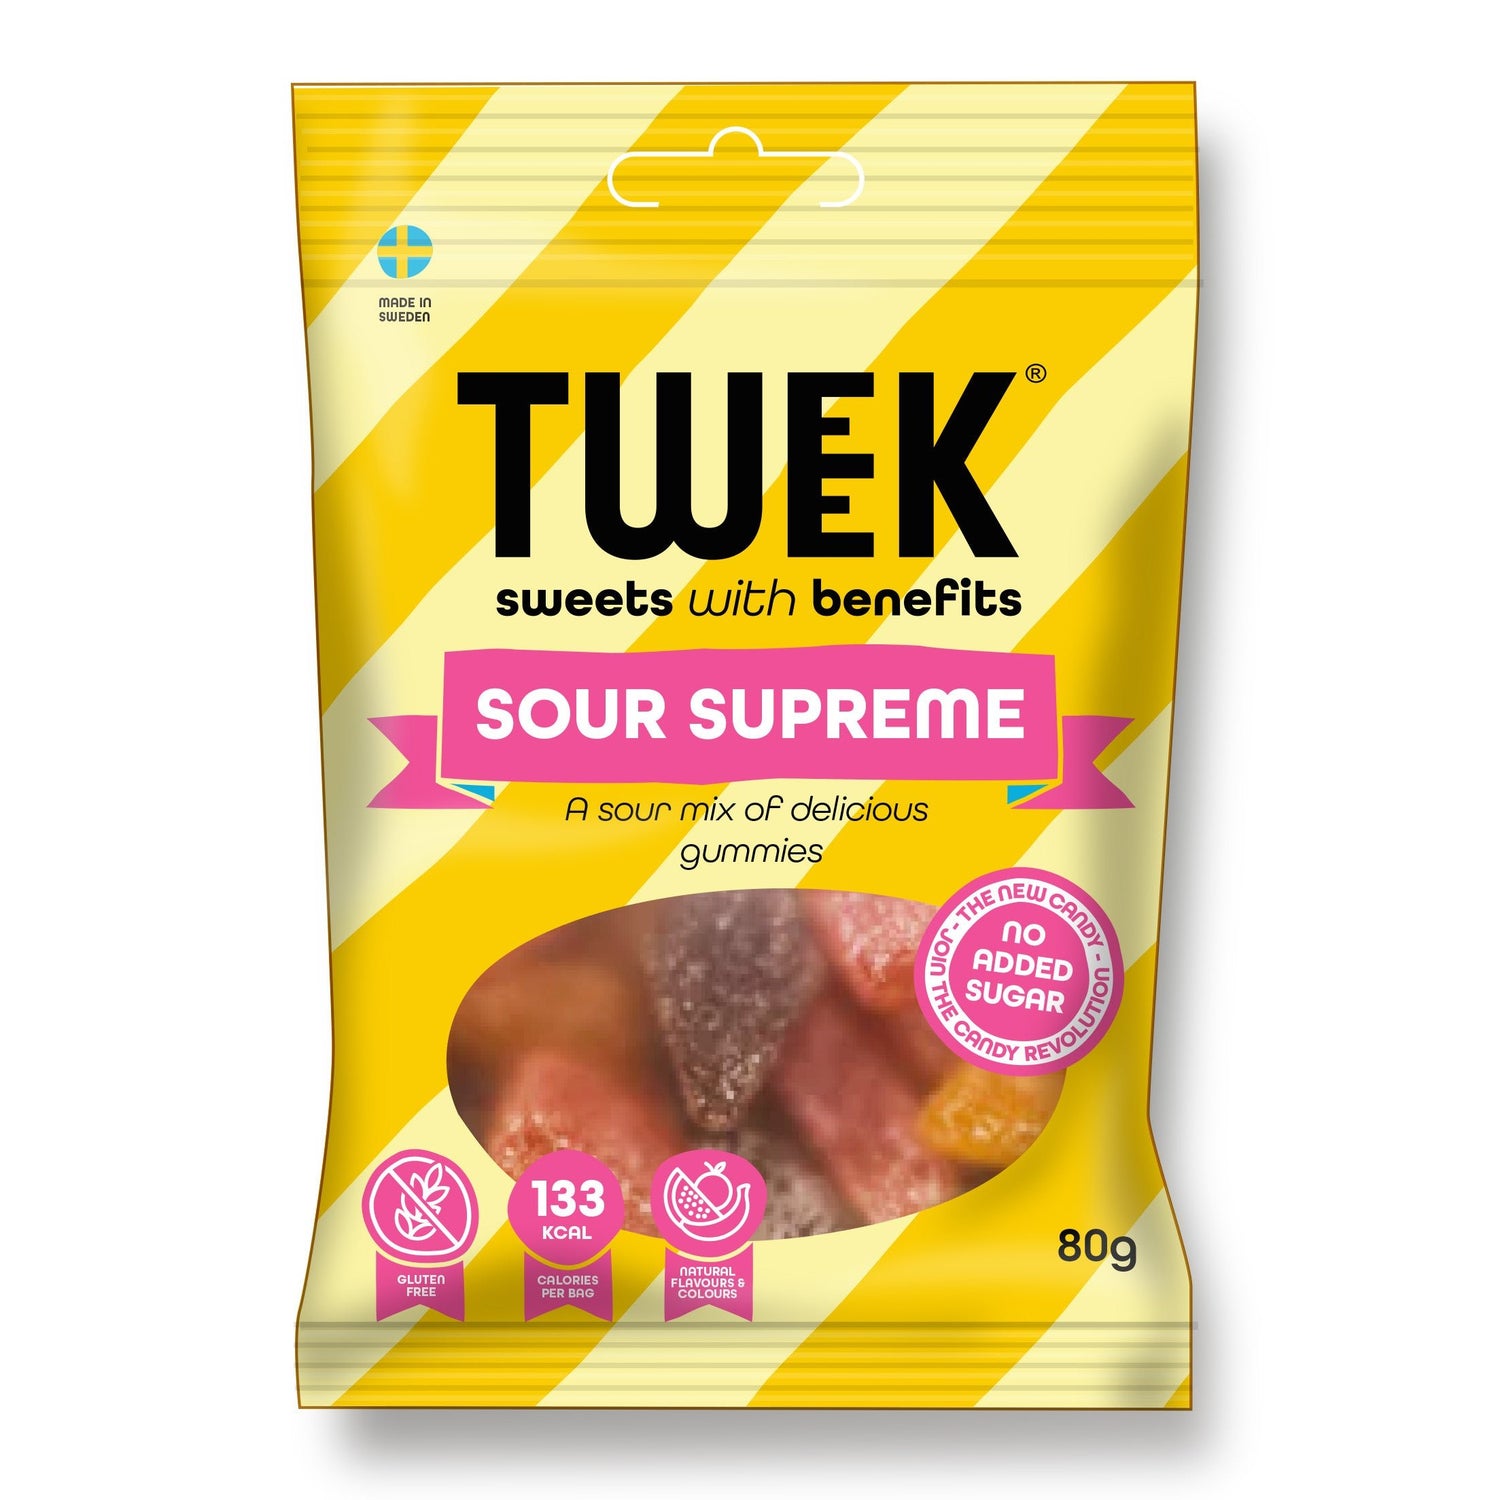 Tweek Sweets With Benefits Sour Supreme 80g - theskinnyfoodco